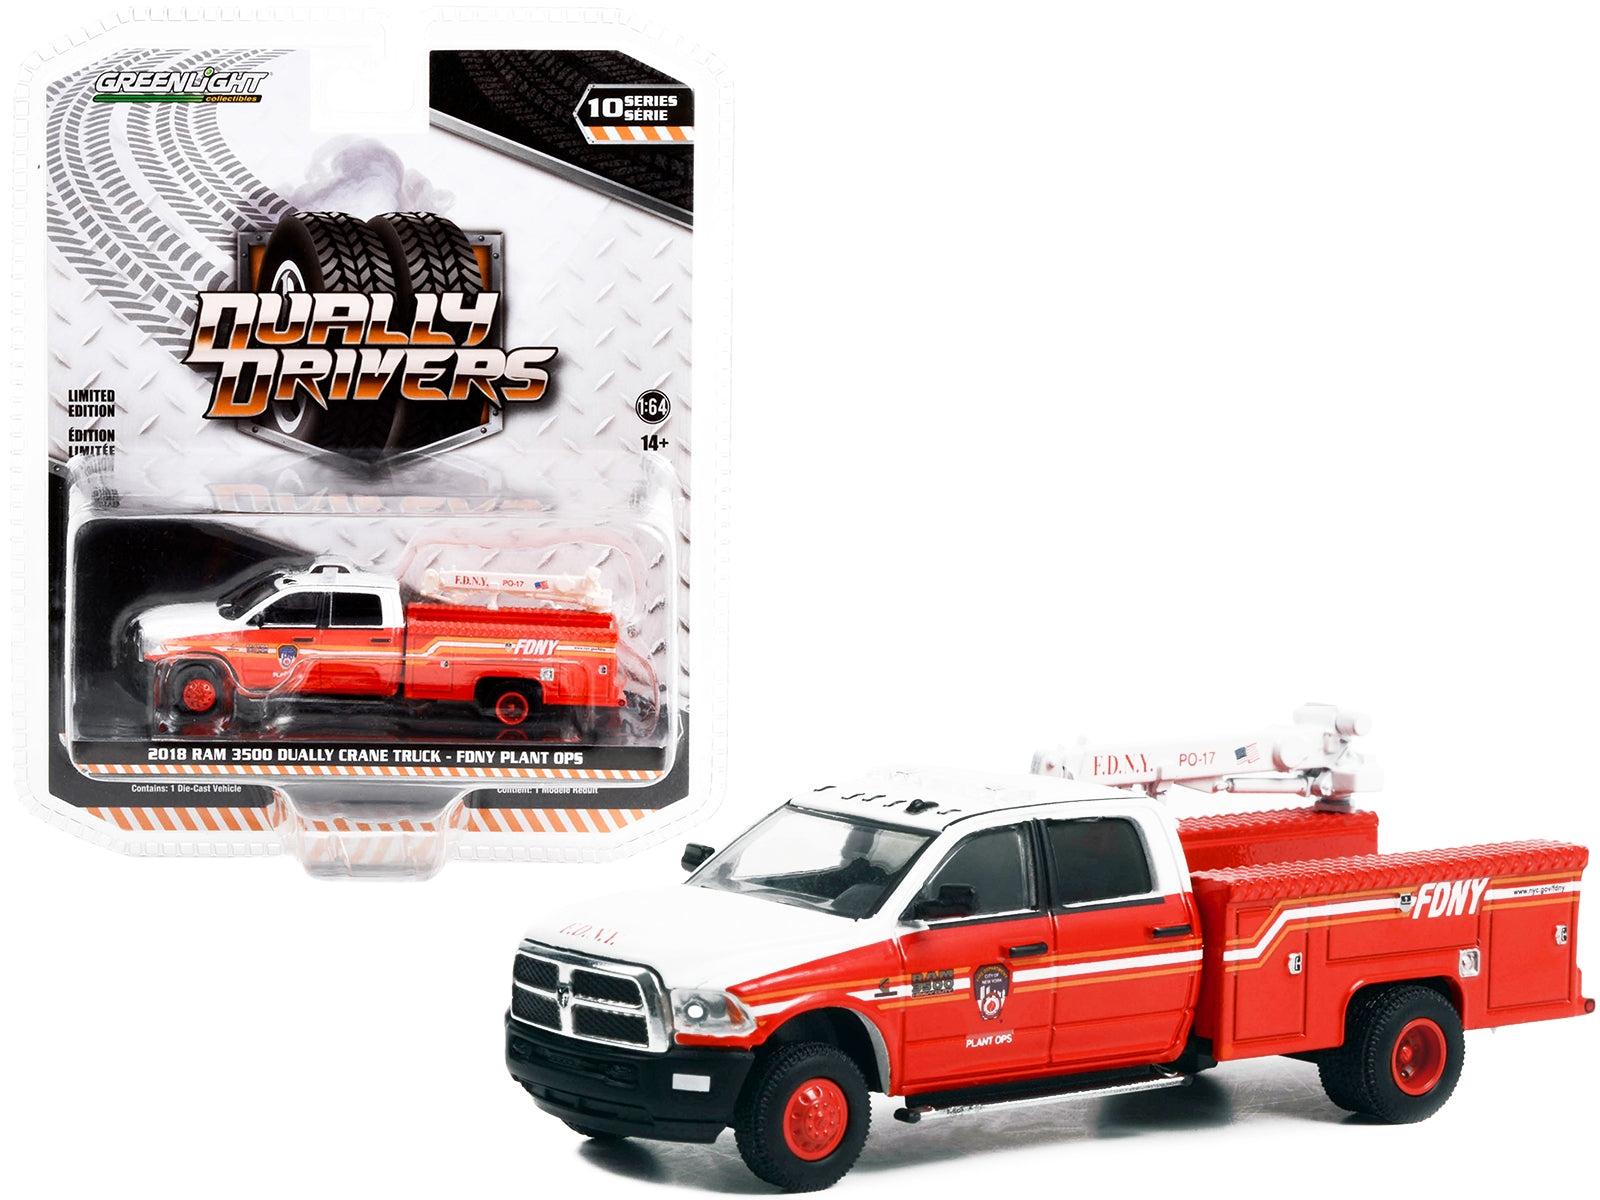 2018 Ram 3500 Dually Crane Truck Red and White with Stripes "FDNY (Fire Department of the City of New York) Plant Ops" "Dually Drivers" Series 10 1/64 Diecast Model Car by Greenlight